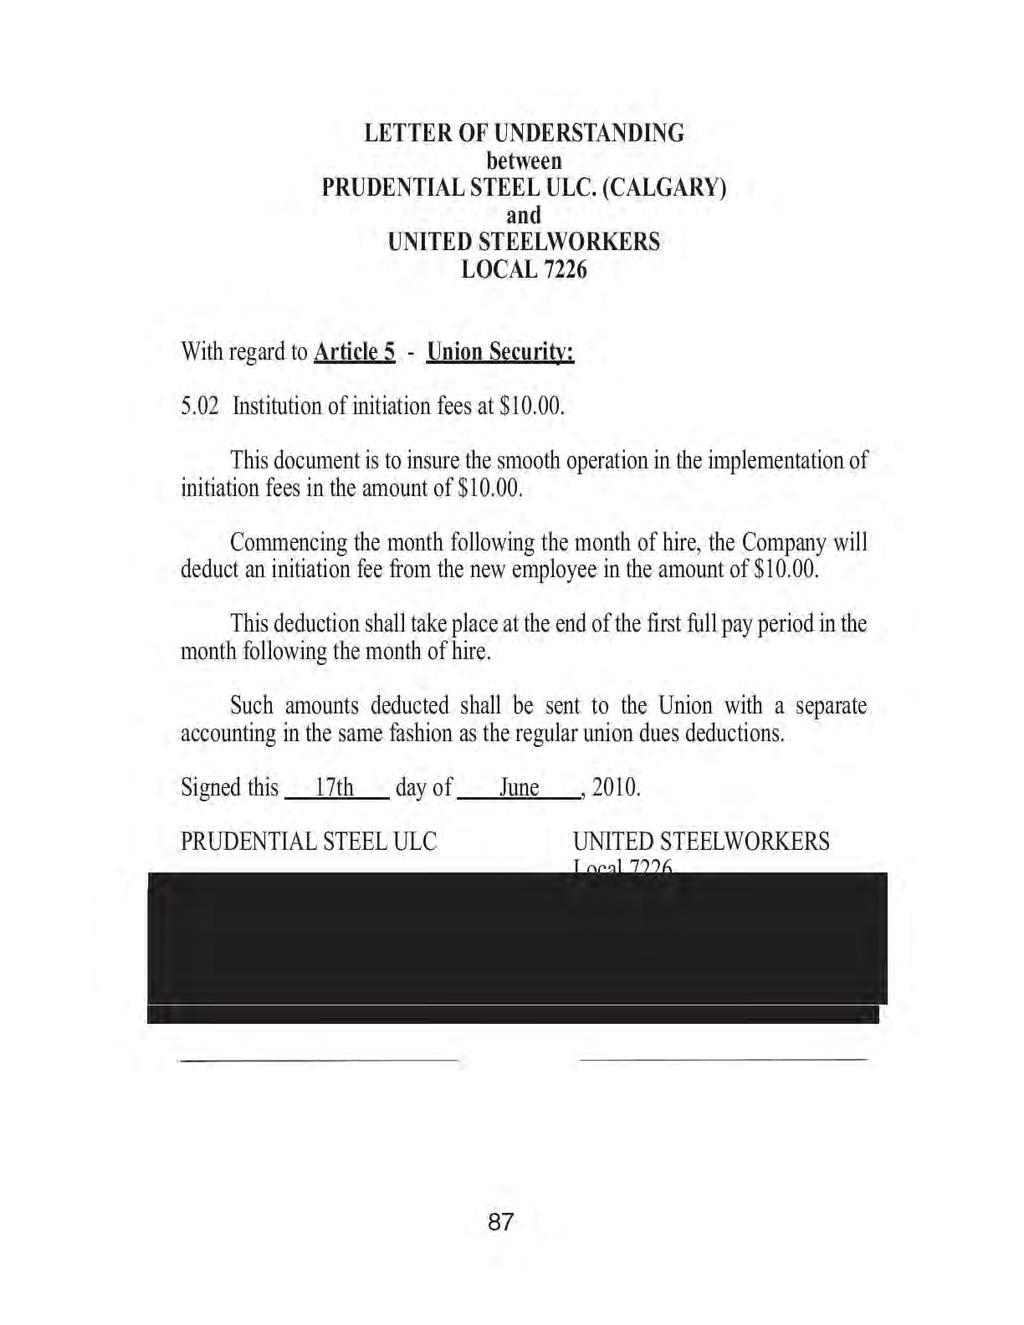 LETTER OF UNDERSTANDING between PRUDENTIAL STEEL ULC. (CALGARY) and UNITED STEELWORKERS LOCAL 7226 With regard to Article 5 - Union Security: 5.02 Institution of initiation fees at $10.00.